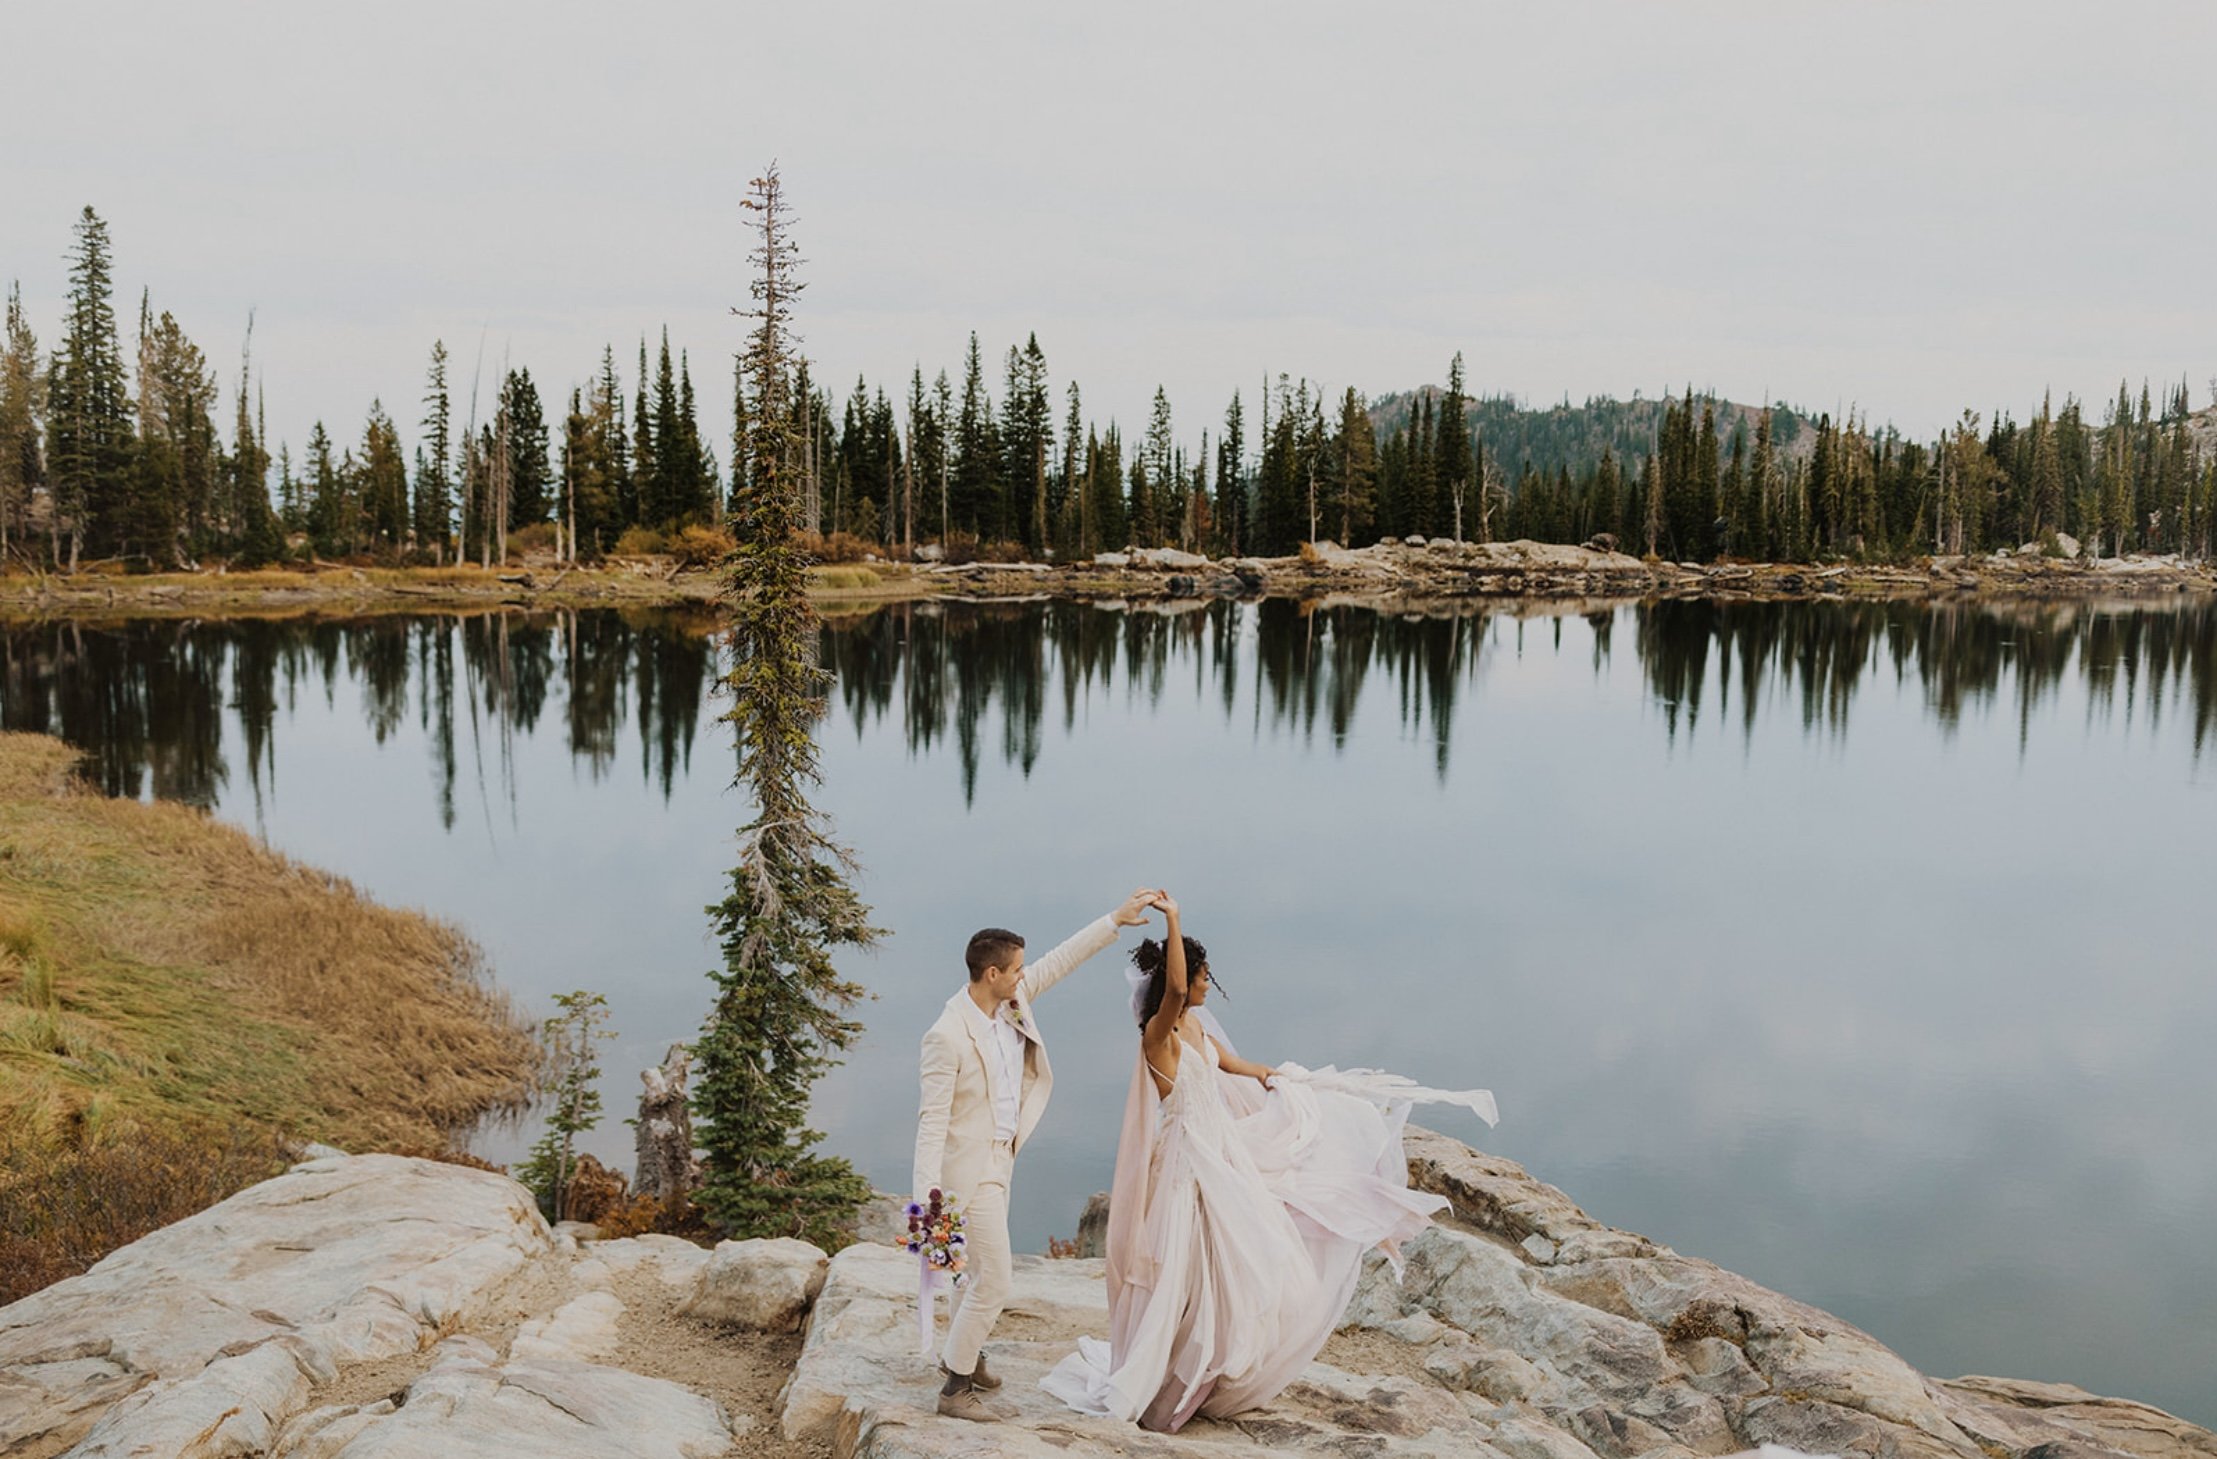   Swan wedding dress . Elopement in McCall, Idaho. Photo by  Kylie Morgan Photography.   